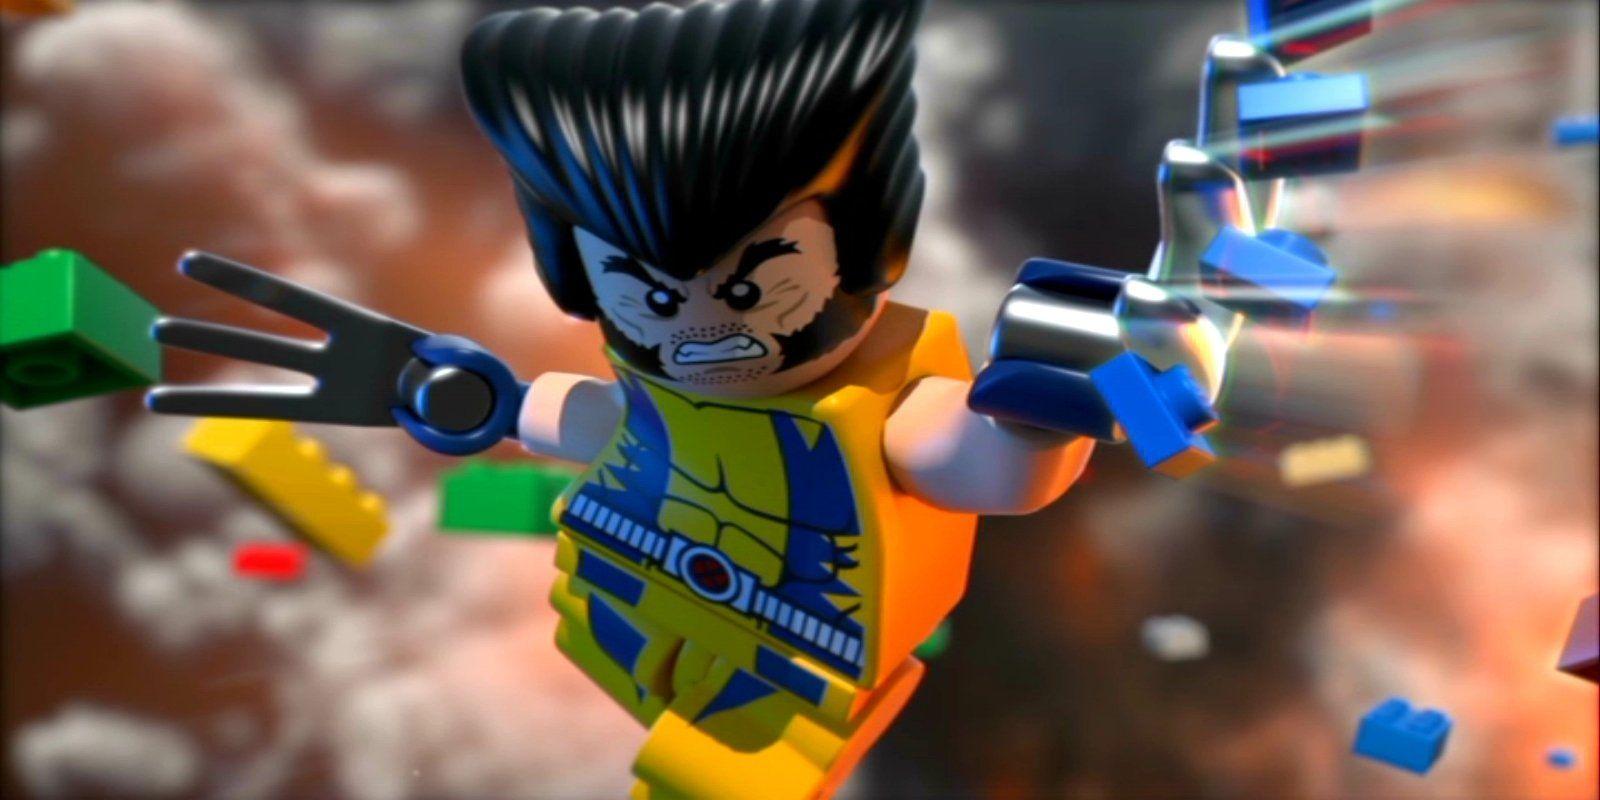 Lego HD Wallpaper and Background Image